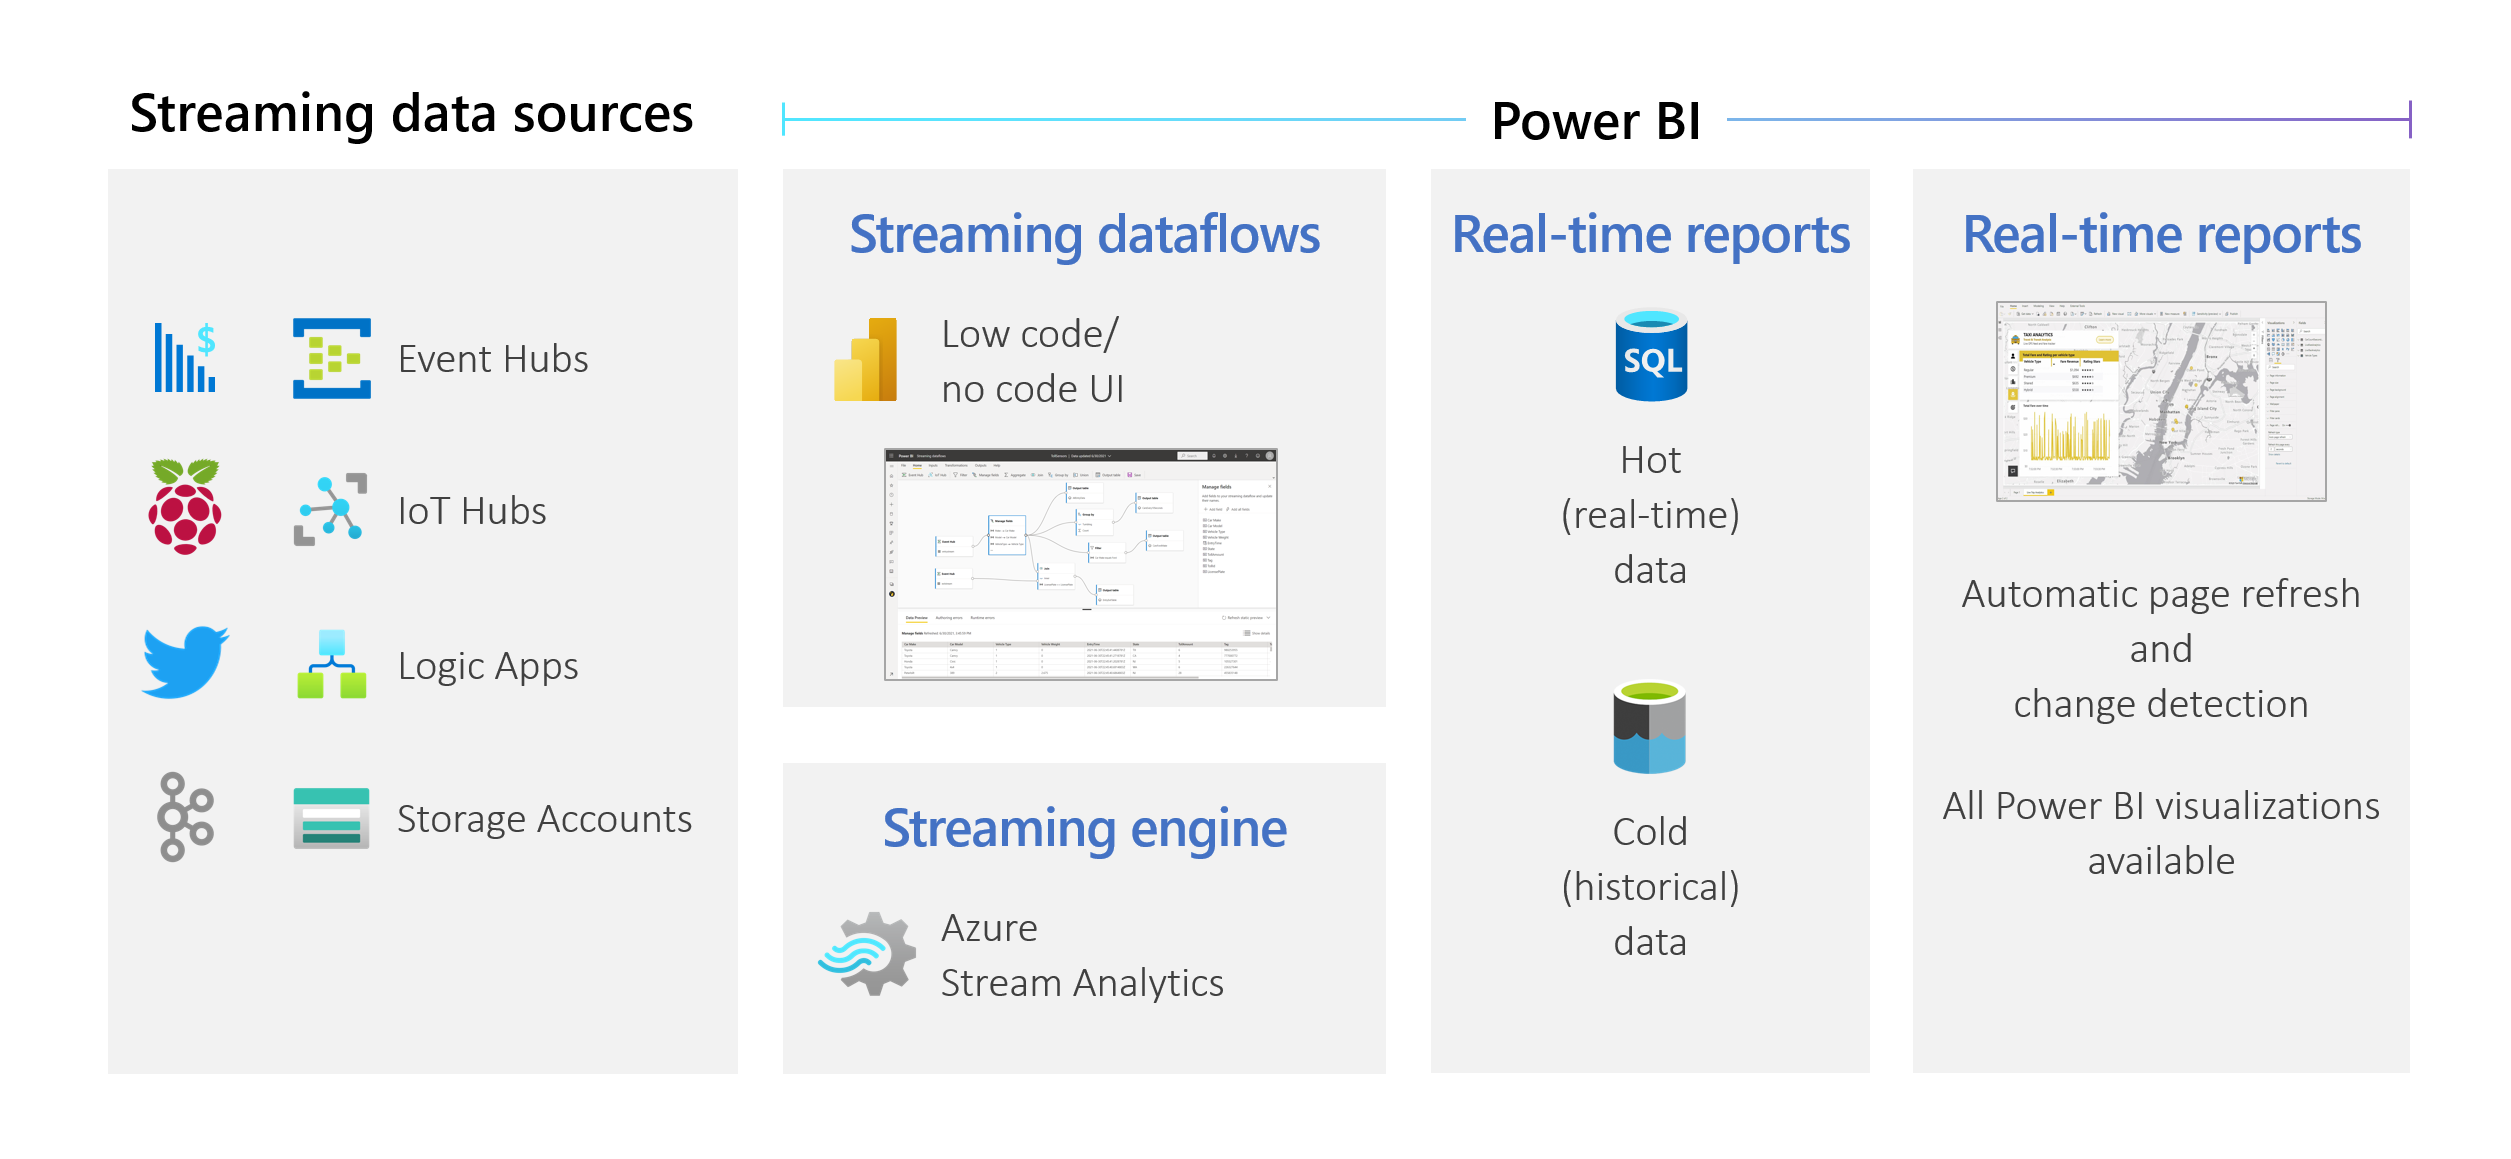 Stream Handling Streams - means flow of data to and from program